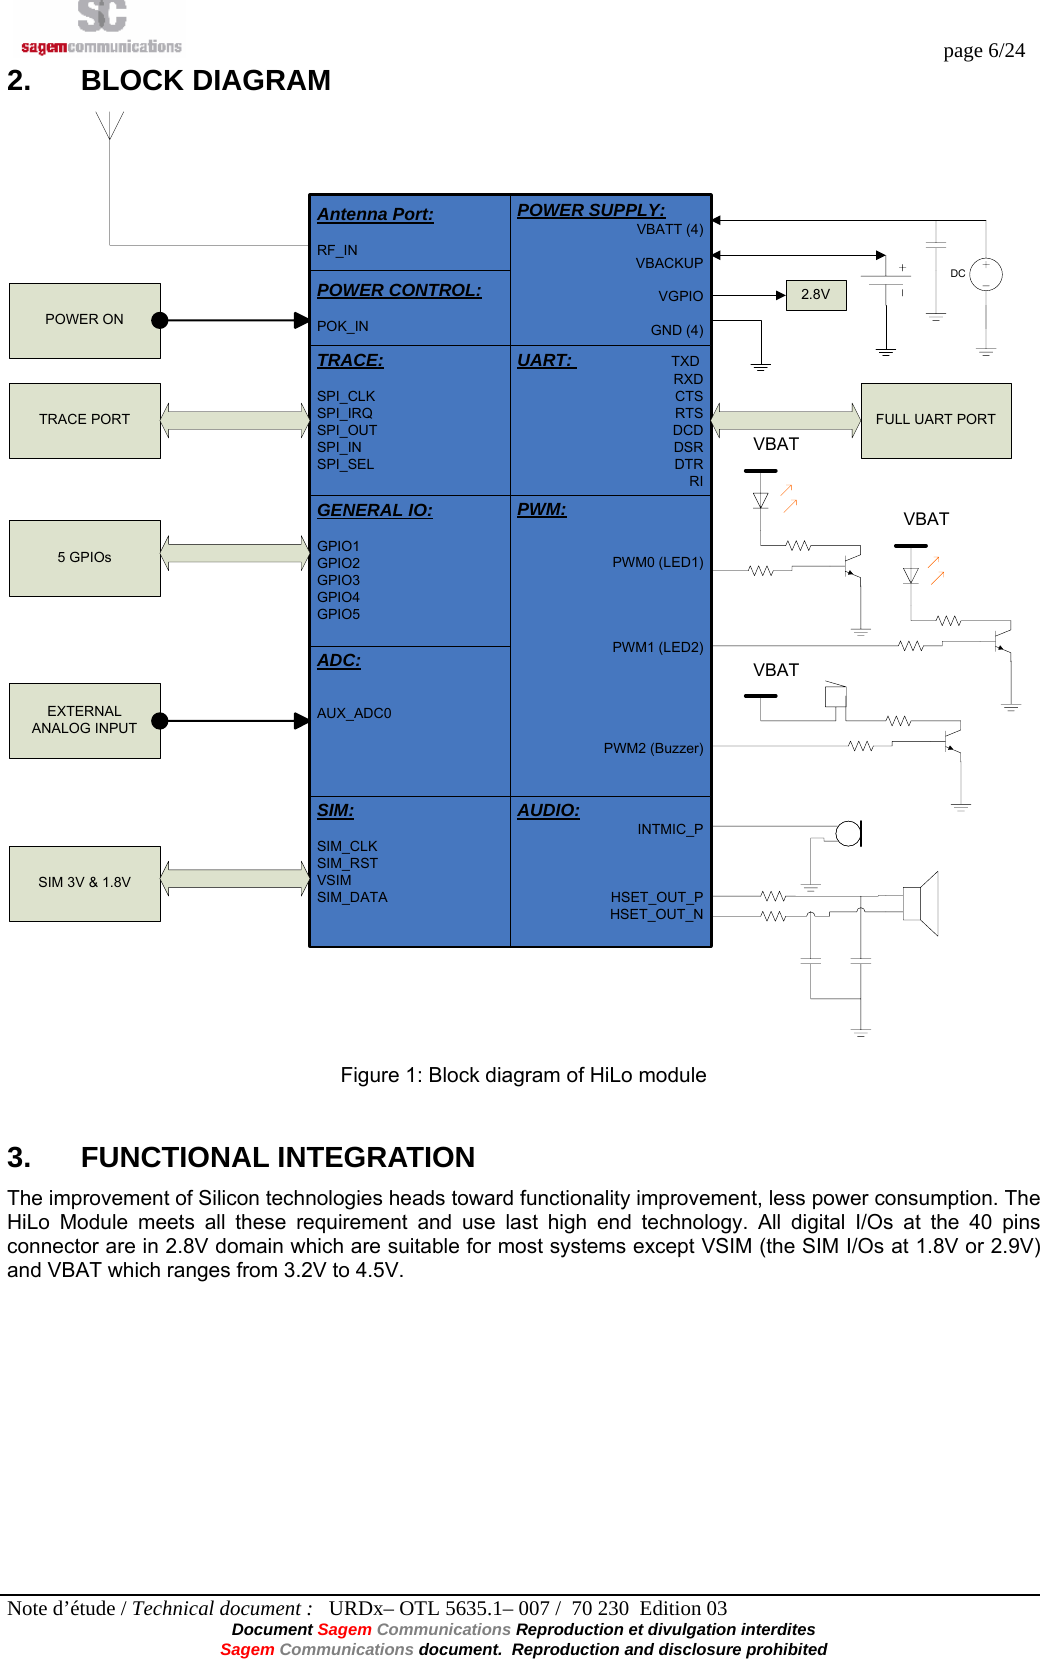  page 6/24 Note d’étude / Technical document :   URDx– OTL 5635.1– 007 /  70 230  Edition 03 Document Sagem Communications Reproduction et divulgation interdites Sagem Communications document.  Reproduction and disclosure prohibited 2. BLOCK DIAGRAM POWER CONTROL:POK_INPOWER SUPPLY: VBATT (4)VBACKUPVGPIOGND (4)TRACE:SPI_CLKSPI_IRQSPI_OUTSPI_INSPI_SELUART:  TXDRXDCTSRTSDCDDSRDTRRIGENERAL IO:GPIO1GPIO2GPIO3GPIO4GPIO5ADC:AUX_ADC0PWM:PWM0 (LED1)PWM1 (LED2)PWM2 (Buzzer)SIM:SIM_CLKSIM_RSTVSIMSIM_DATAAUDIO:INTMIC_PHSET_OUT_PHSET_OUT_NPOWER ONTRACE PORTSIM 3V &amp; 1.8VEXTERNAL ANALOG INPUT5 GPIOsFULL UART PORTDC2.8VAntenna Port:RF_INVBATVBATVBAT Figure 1: Block diagram of HiLo module 3. FUNCTIONAL INTEGRATION The improvement of Silicon technologies heads toward functionality improvement, less power consumption. The HiLo Module meets all these requirement and use last high end technology. All digital I/Os at the 40 pins  connector are in 2.8V domain which are suitable for most systems except VSIM (the SIM I/Os at 1.8V or 2.9V) and VBAT which ranges from 3.2V to 4.5V.  